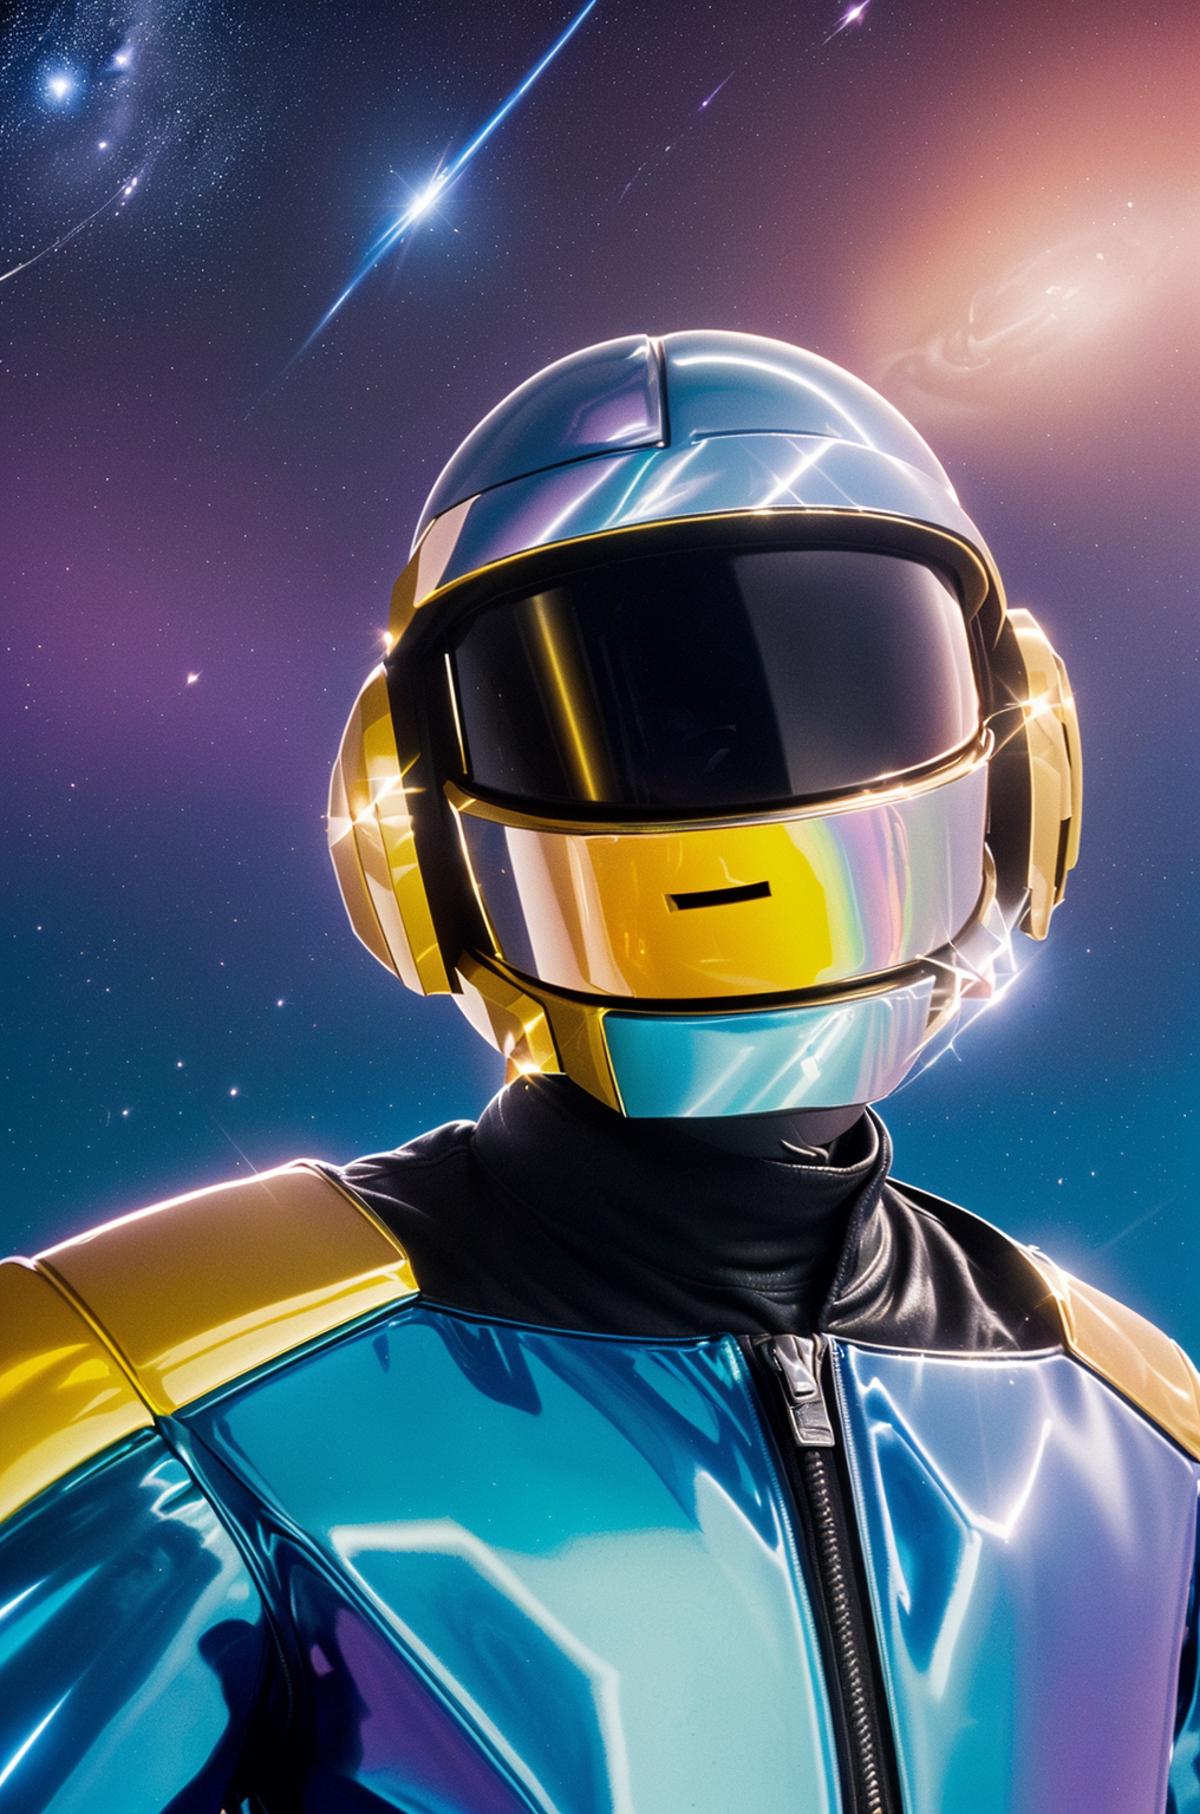 The Daft Punk Helmet and Suit